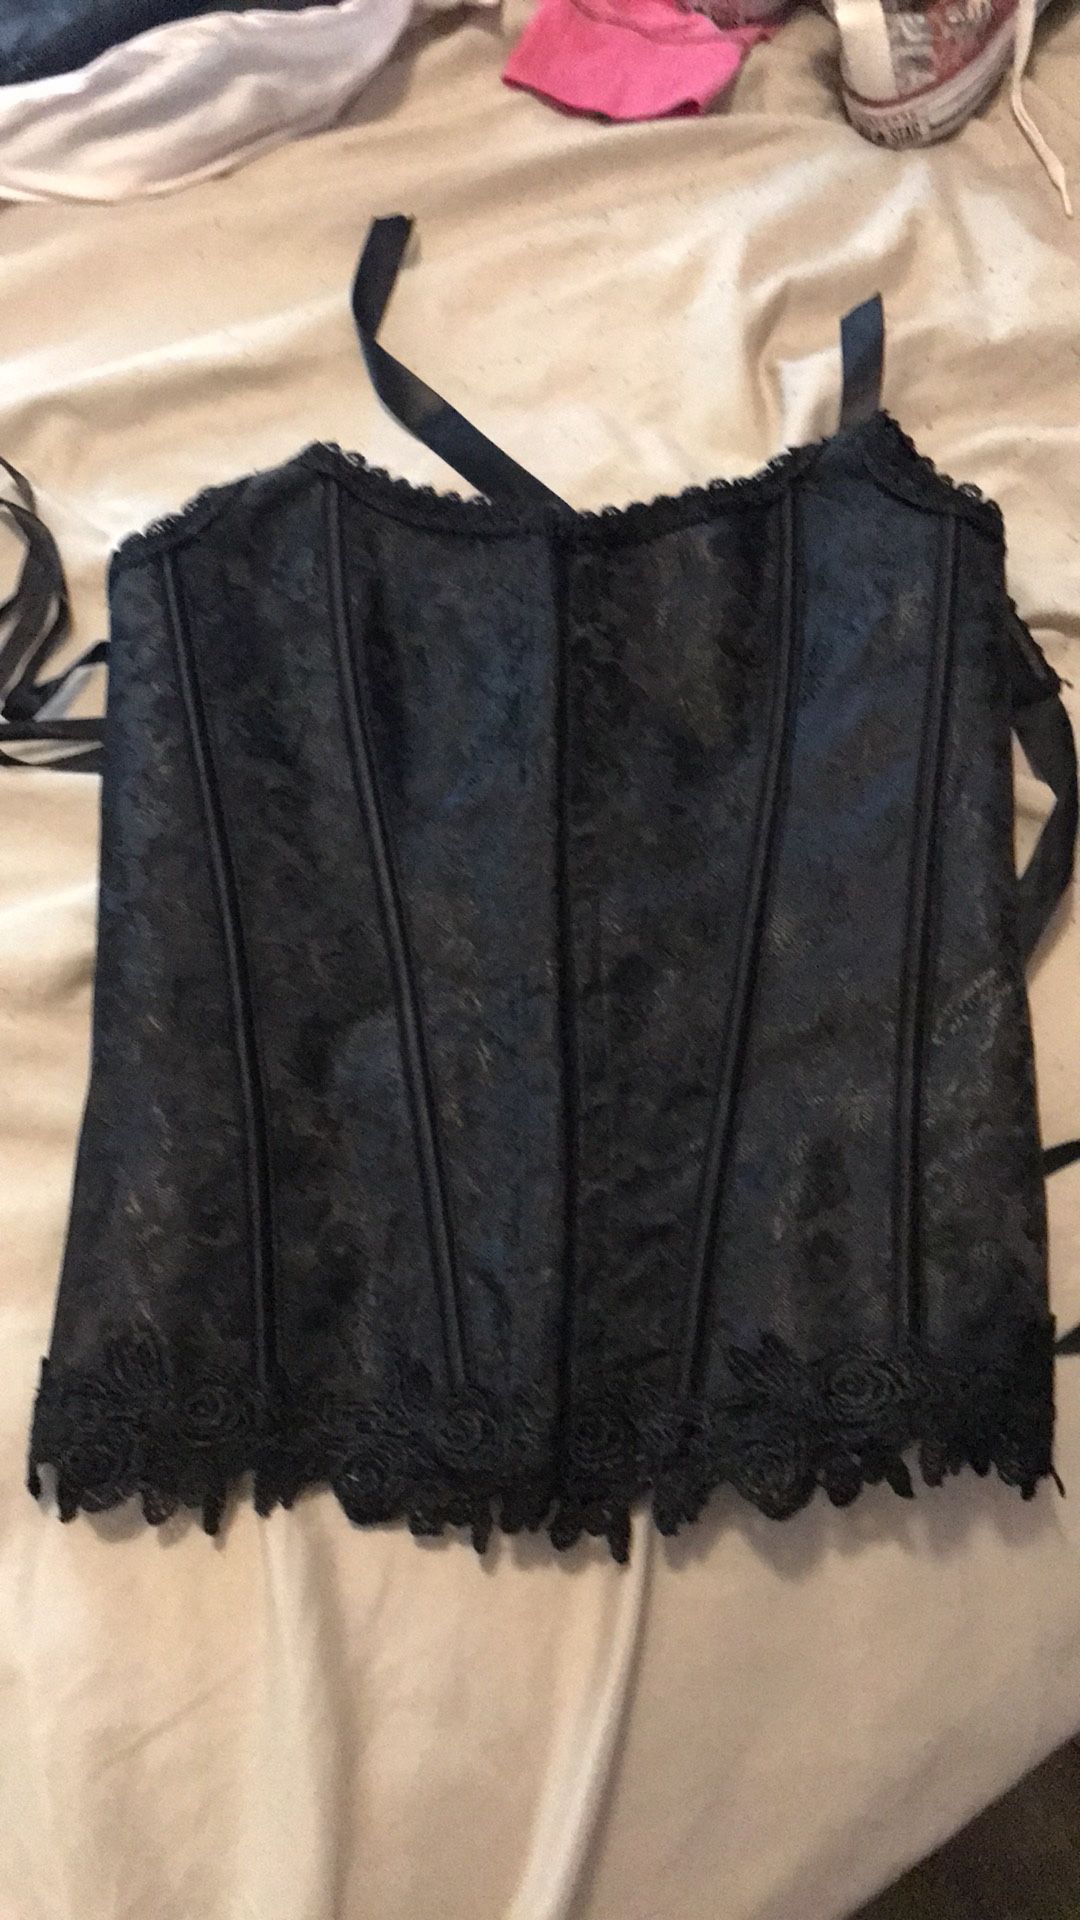 Black Corset With Lace